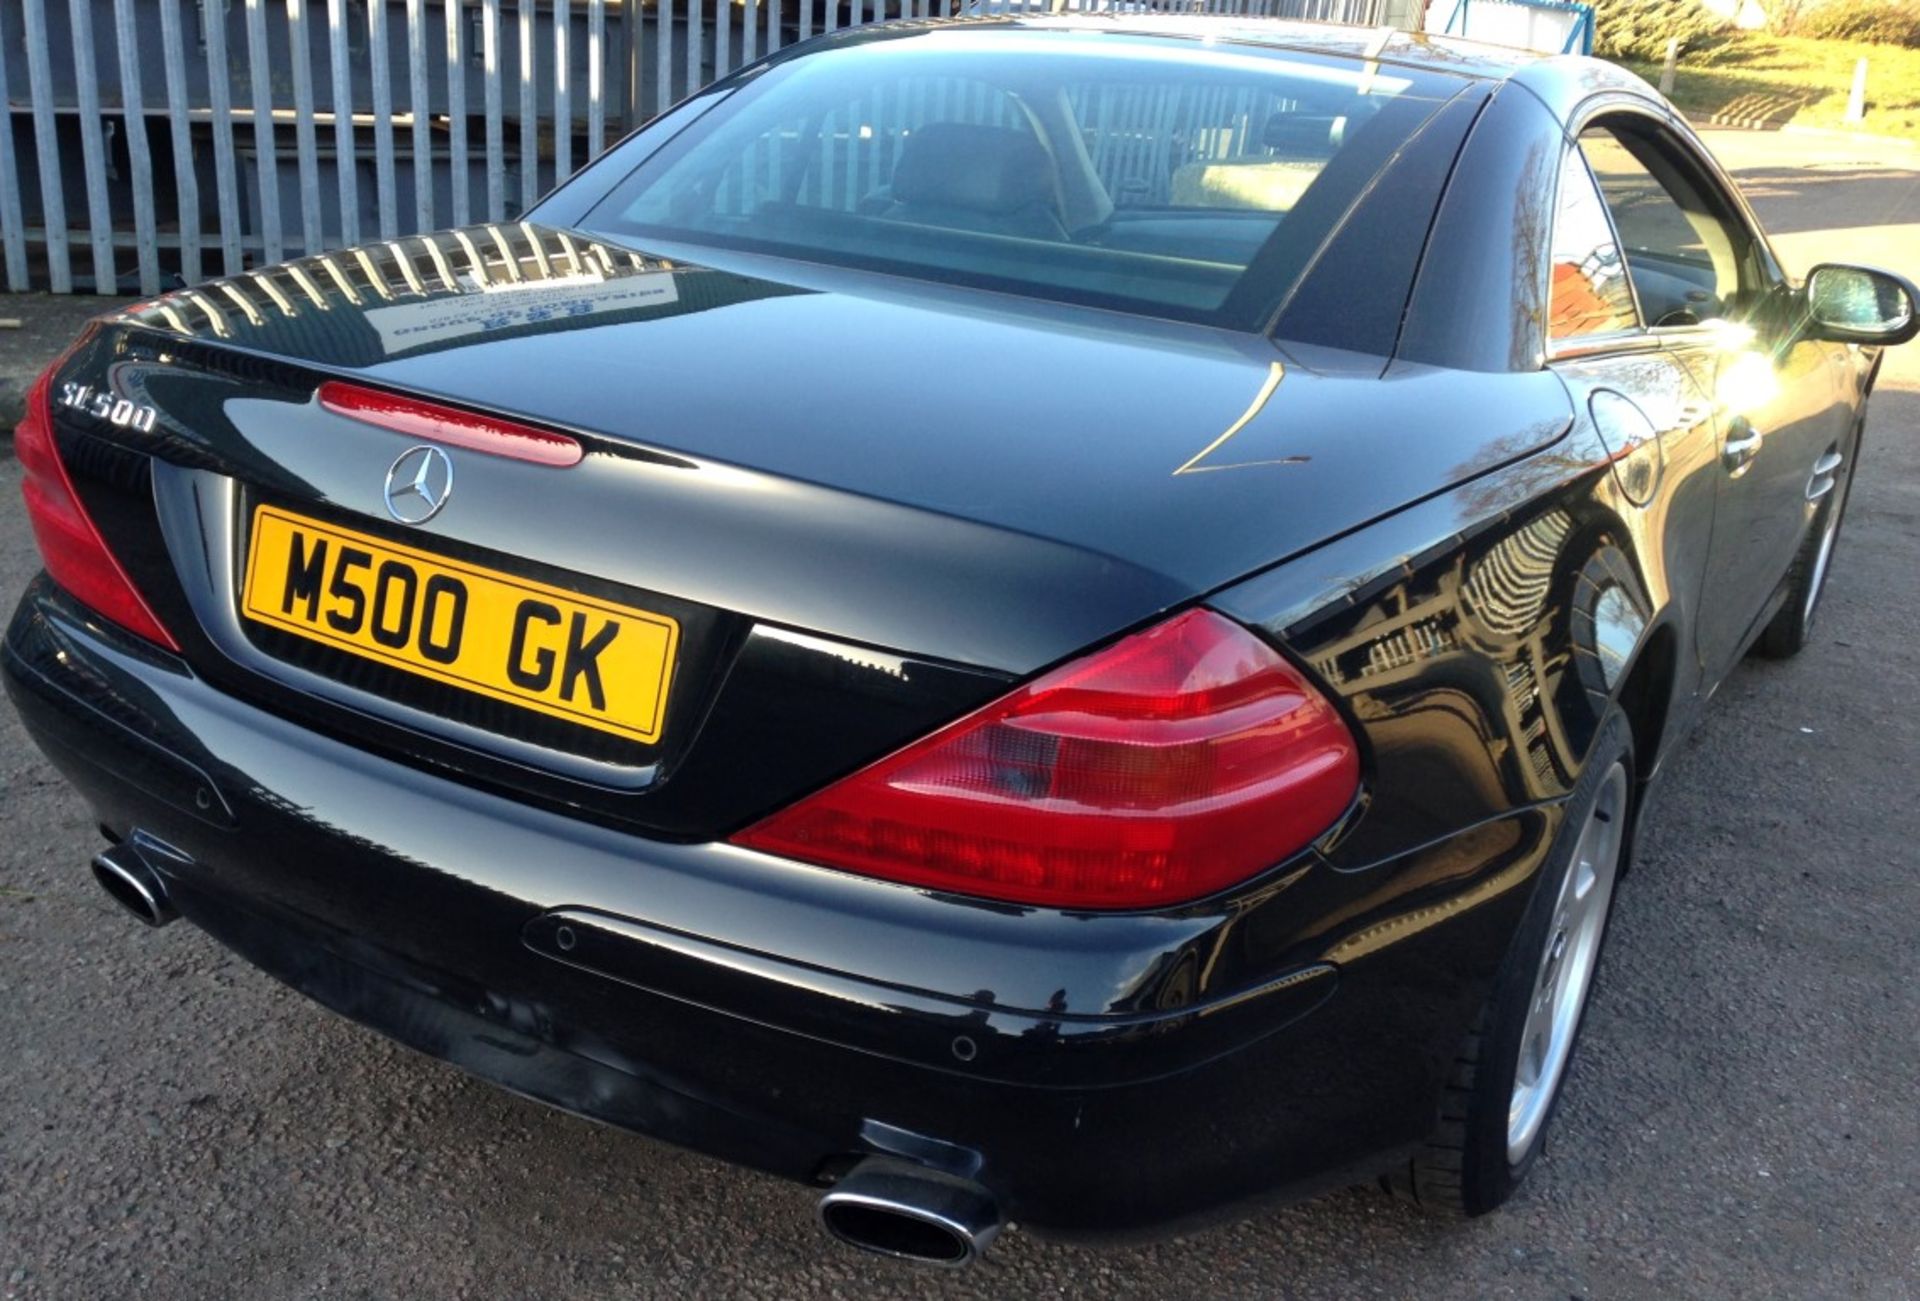 1 x Mercedes SL500 Automatic 5.0 Convertible - Petrol - Year 2002 - 94,500 Miles - Long MOT Expiry - Image 3 of 48